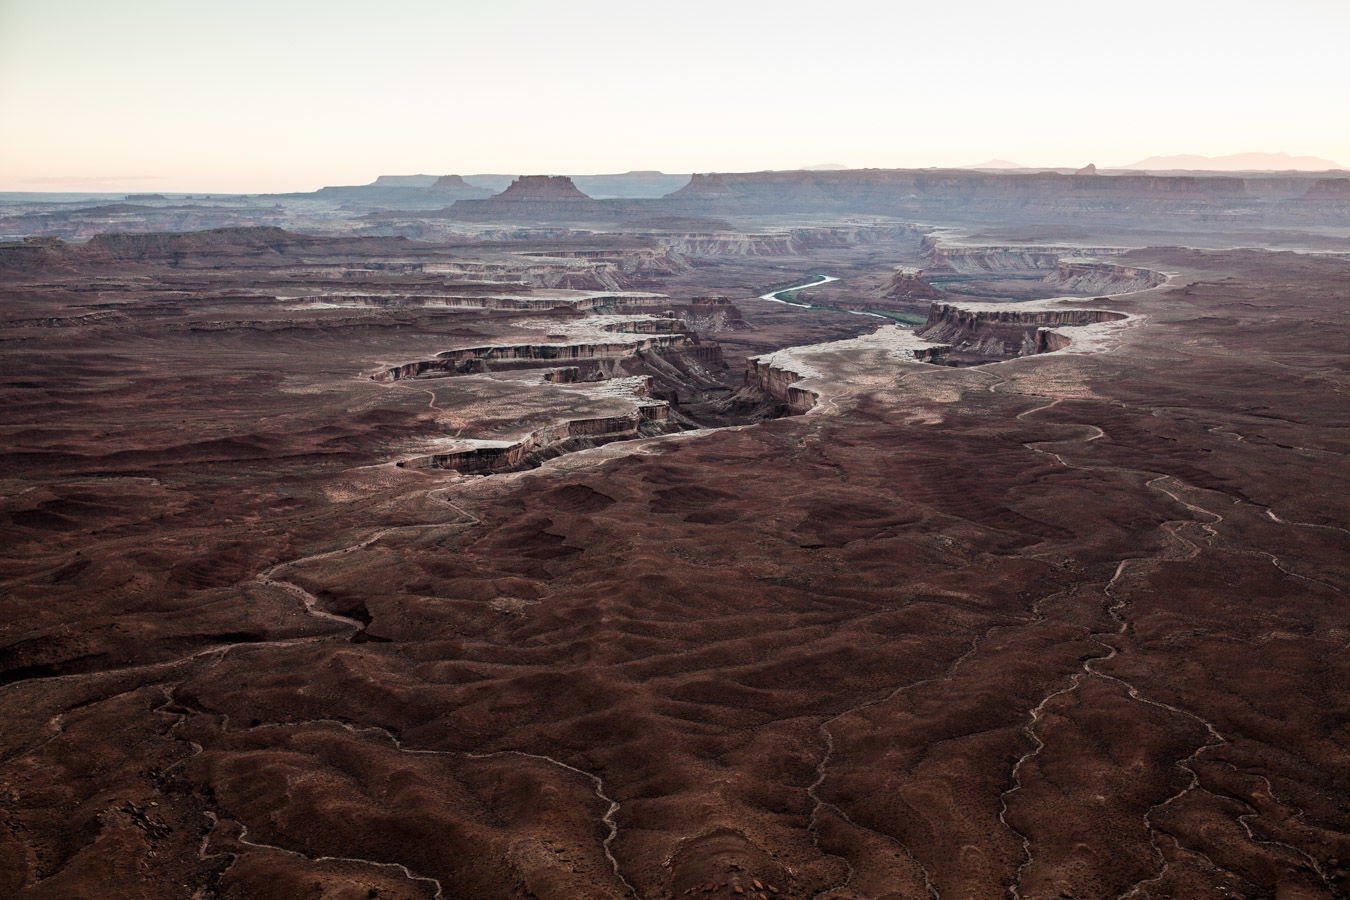 Island in the Sky - Canyonlands